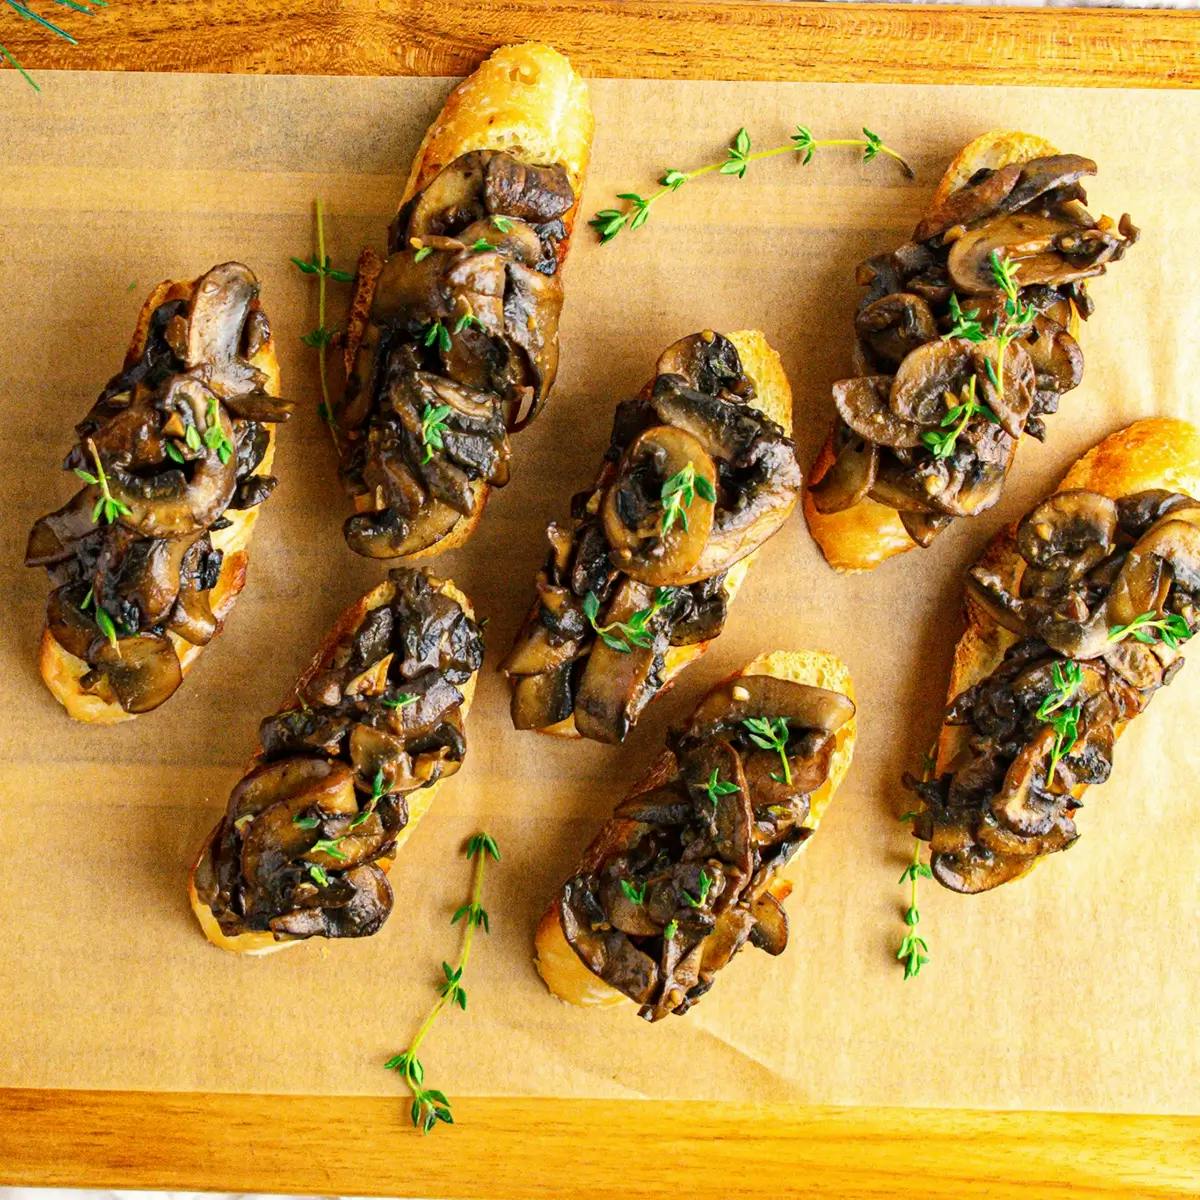 The finished mushroom Christmas appetizer for holiday parties.